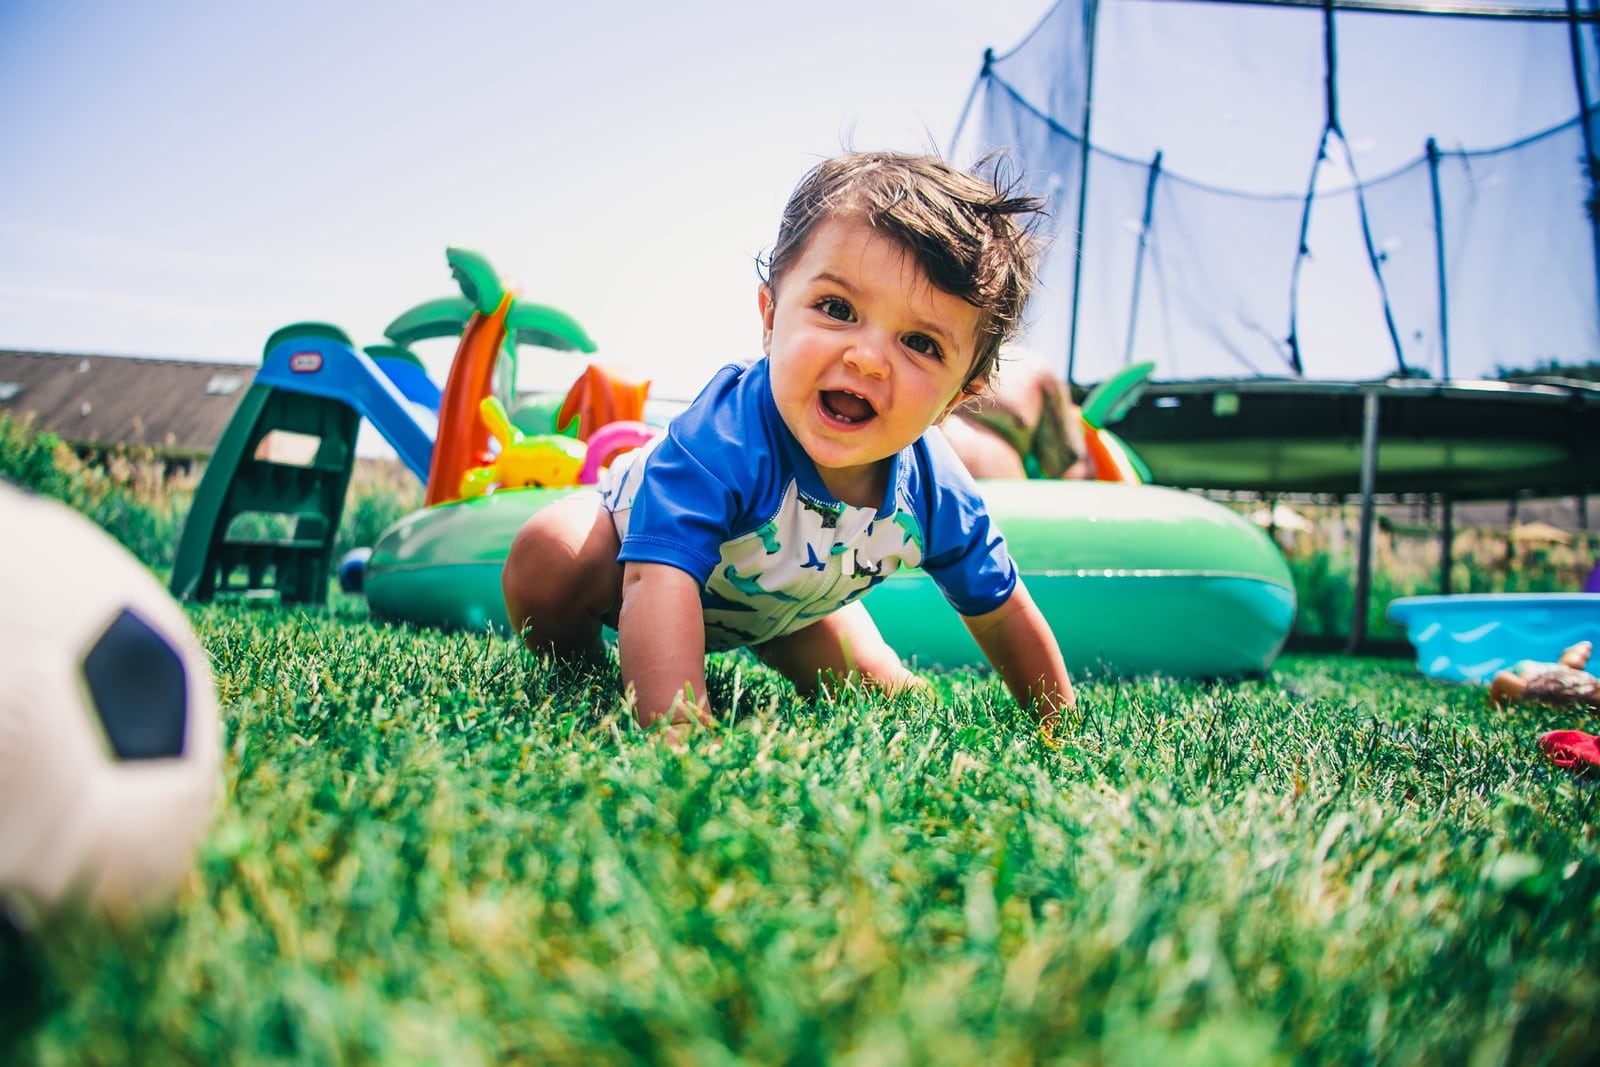 The 12 Best Toddler Trampoline Models in 2022 Toddler Trampoline boy in blue and white crew neck t-shirt sitting on green grass field during daytime